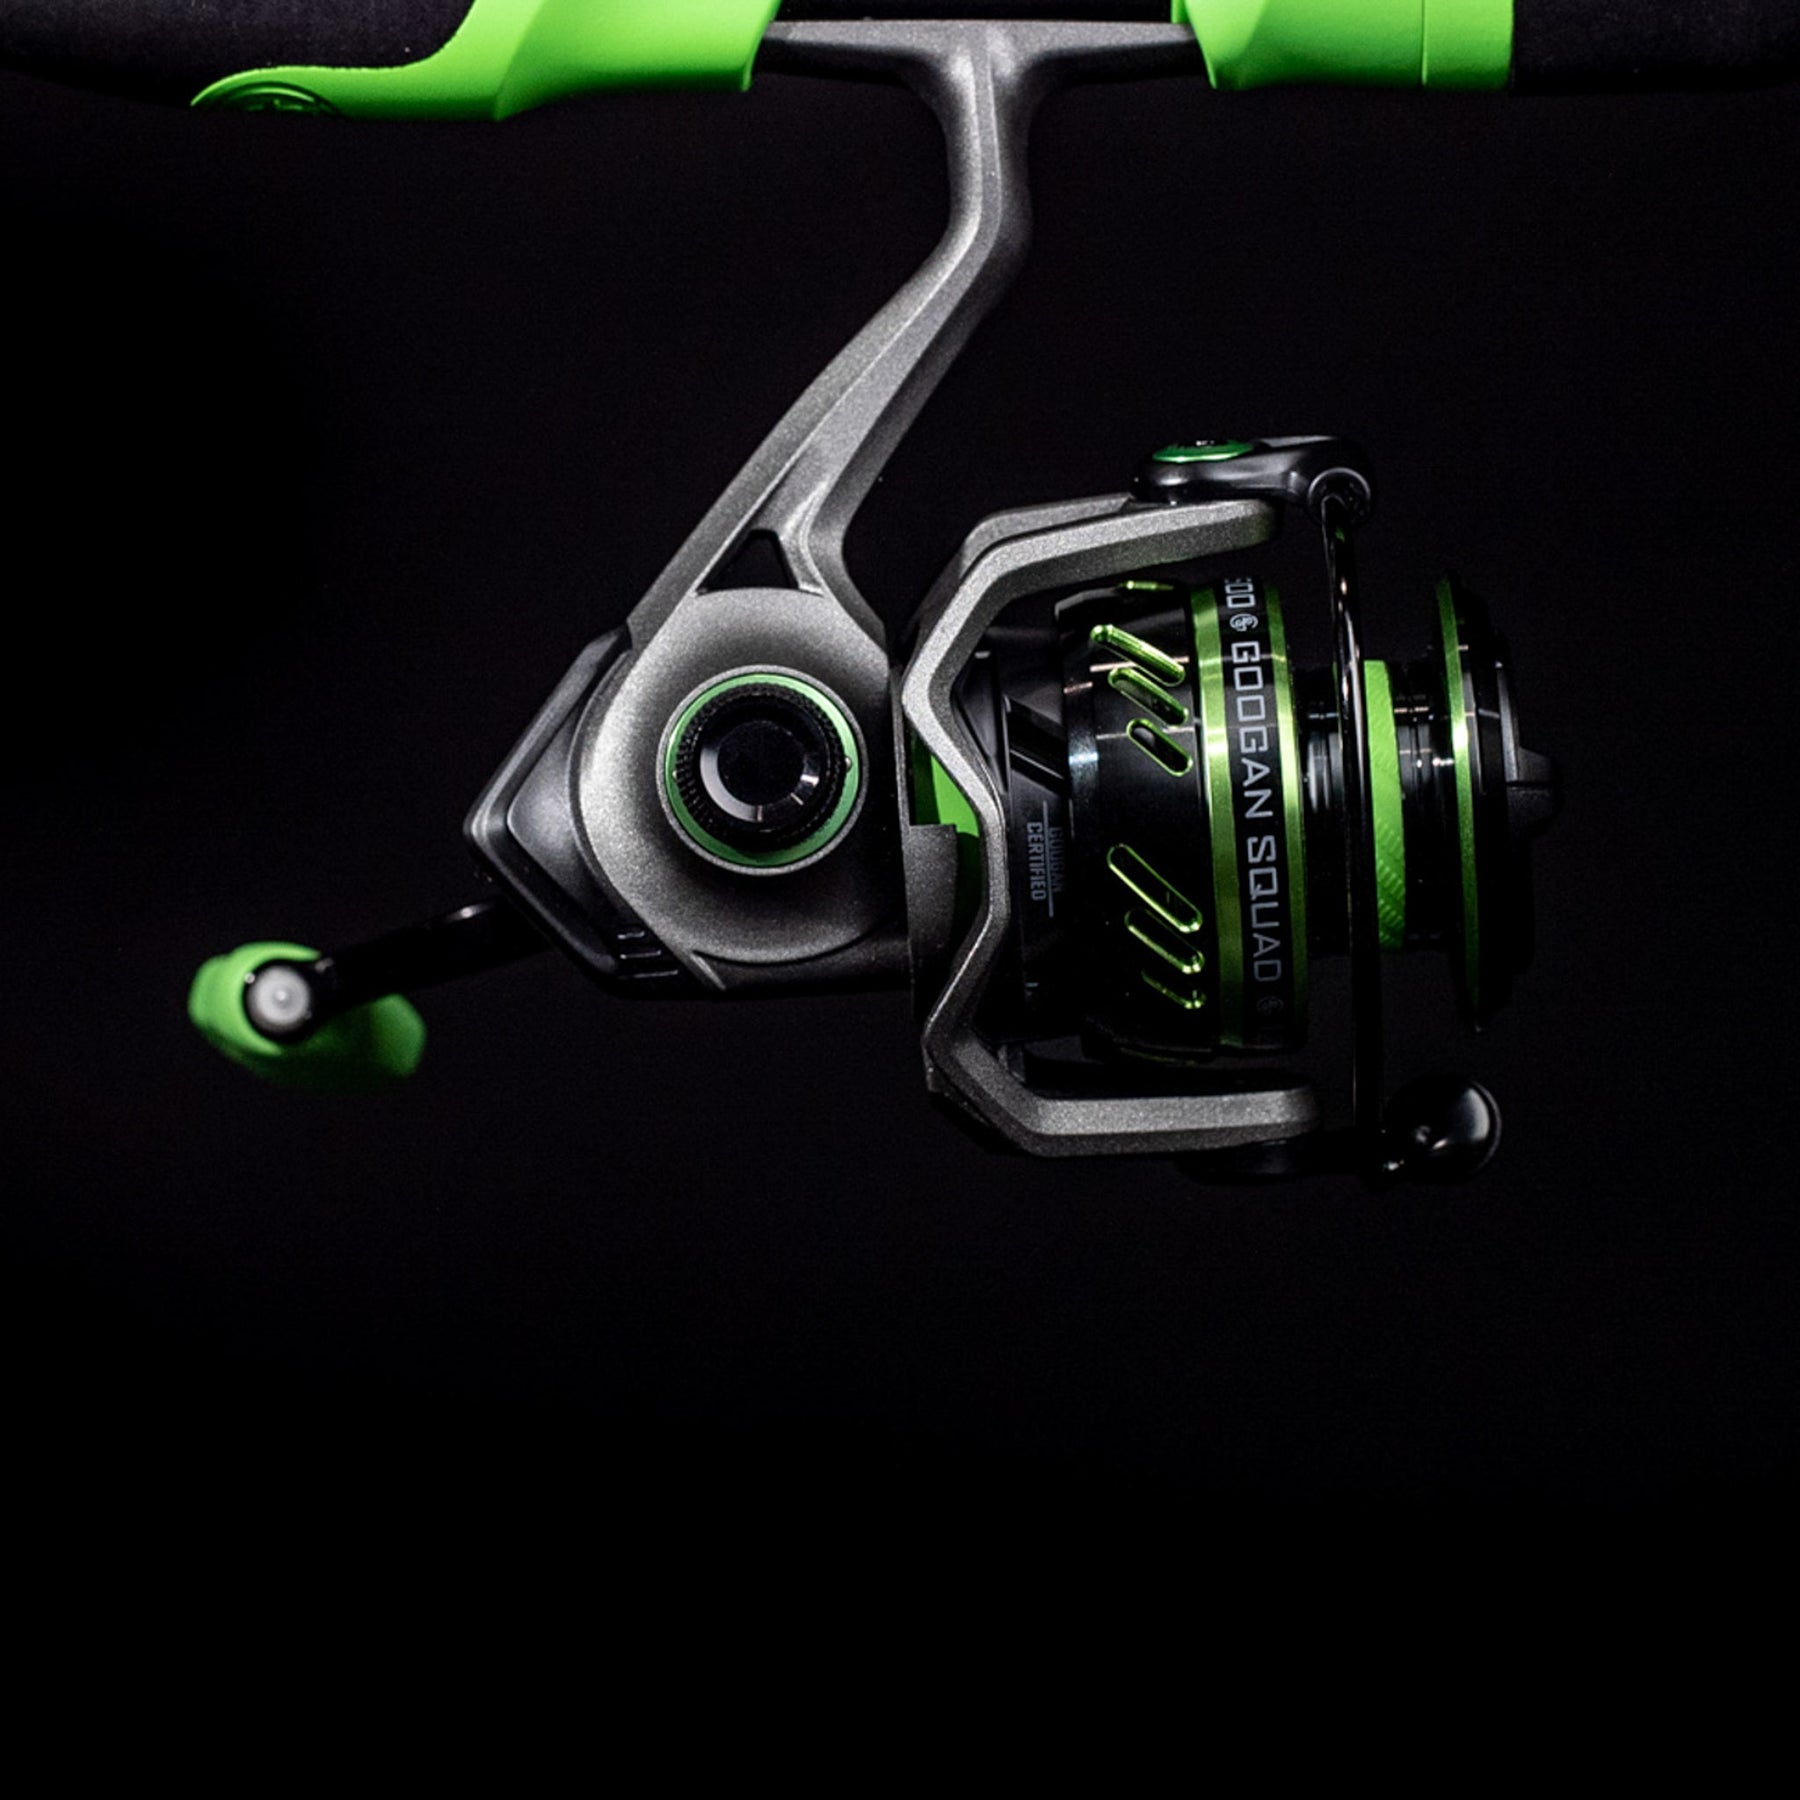 Help Design the High Altitude Backcountry 1000 Spinning Reel